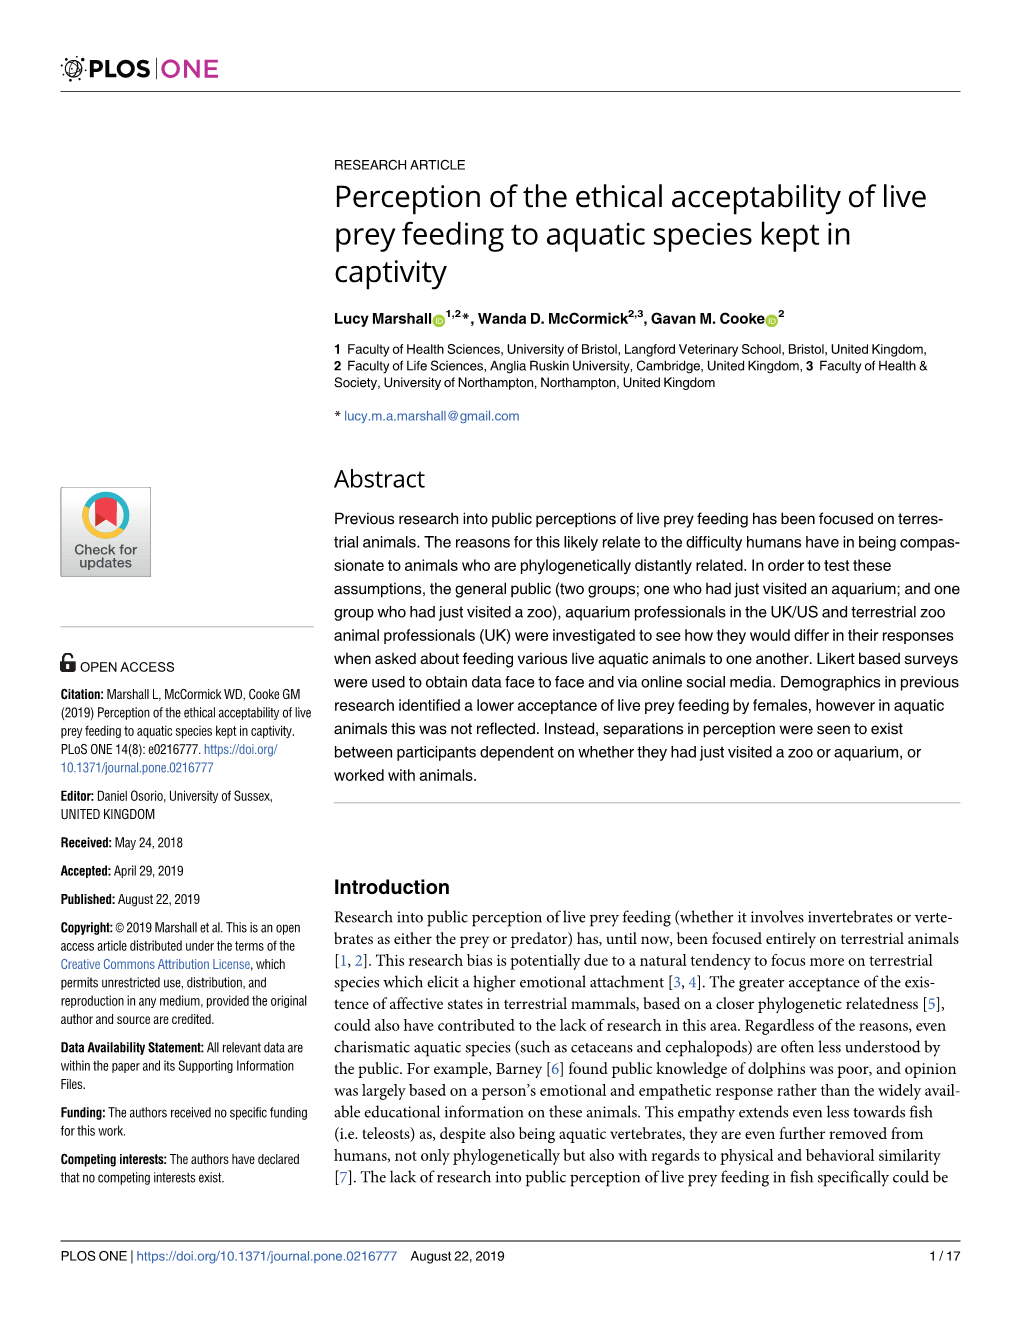 Perception of the Ethical Acceptability of Live Prey Feeding to Aquatic Species Kept in Captivity